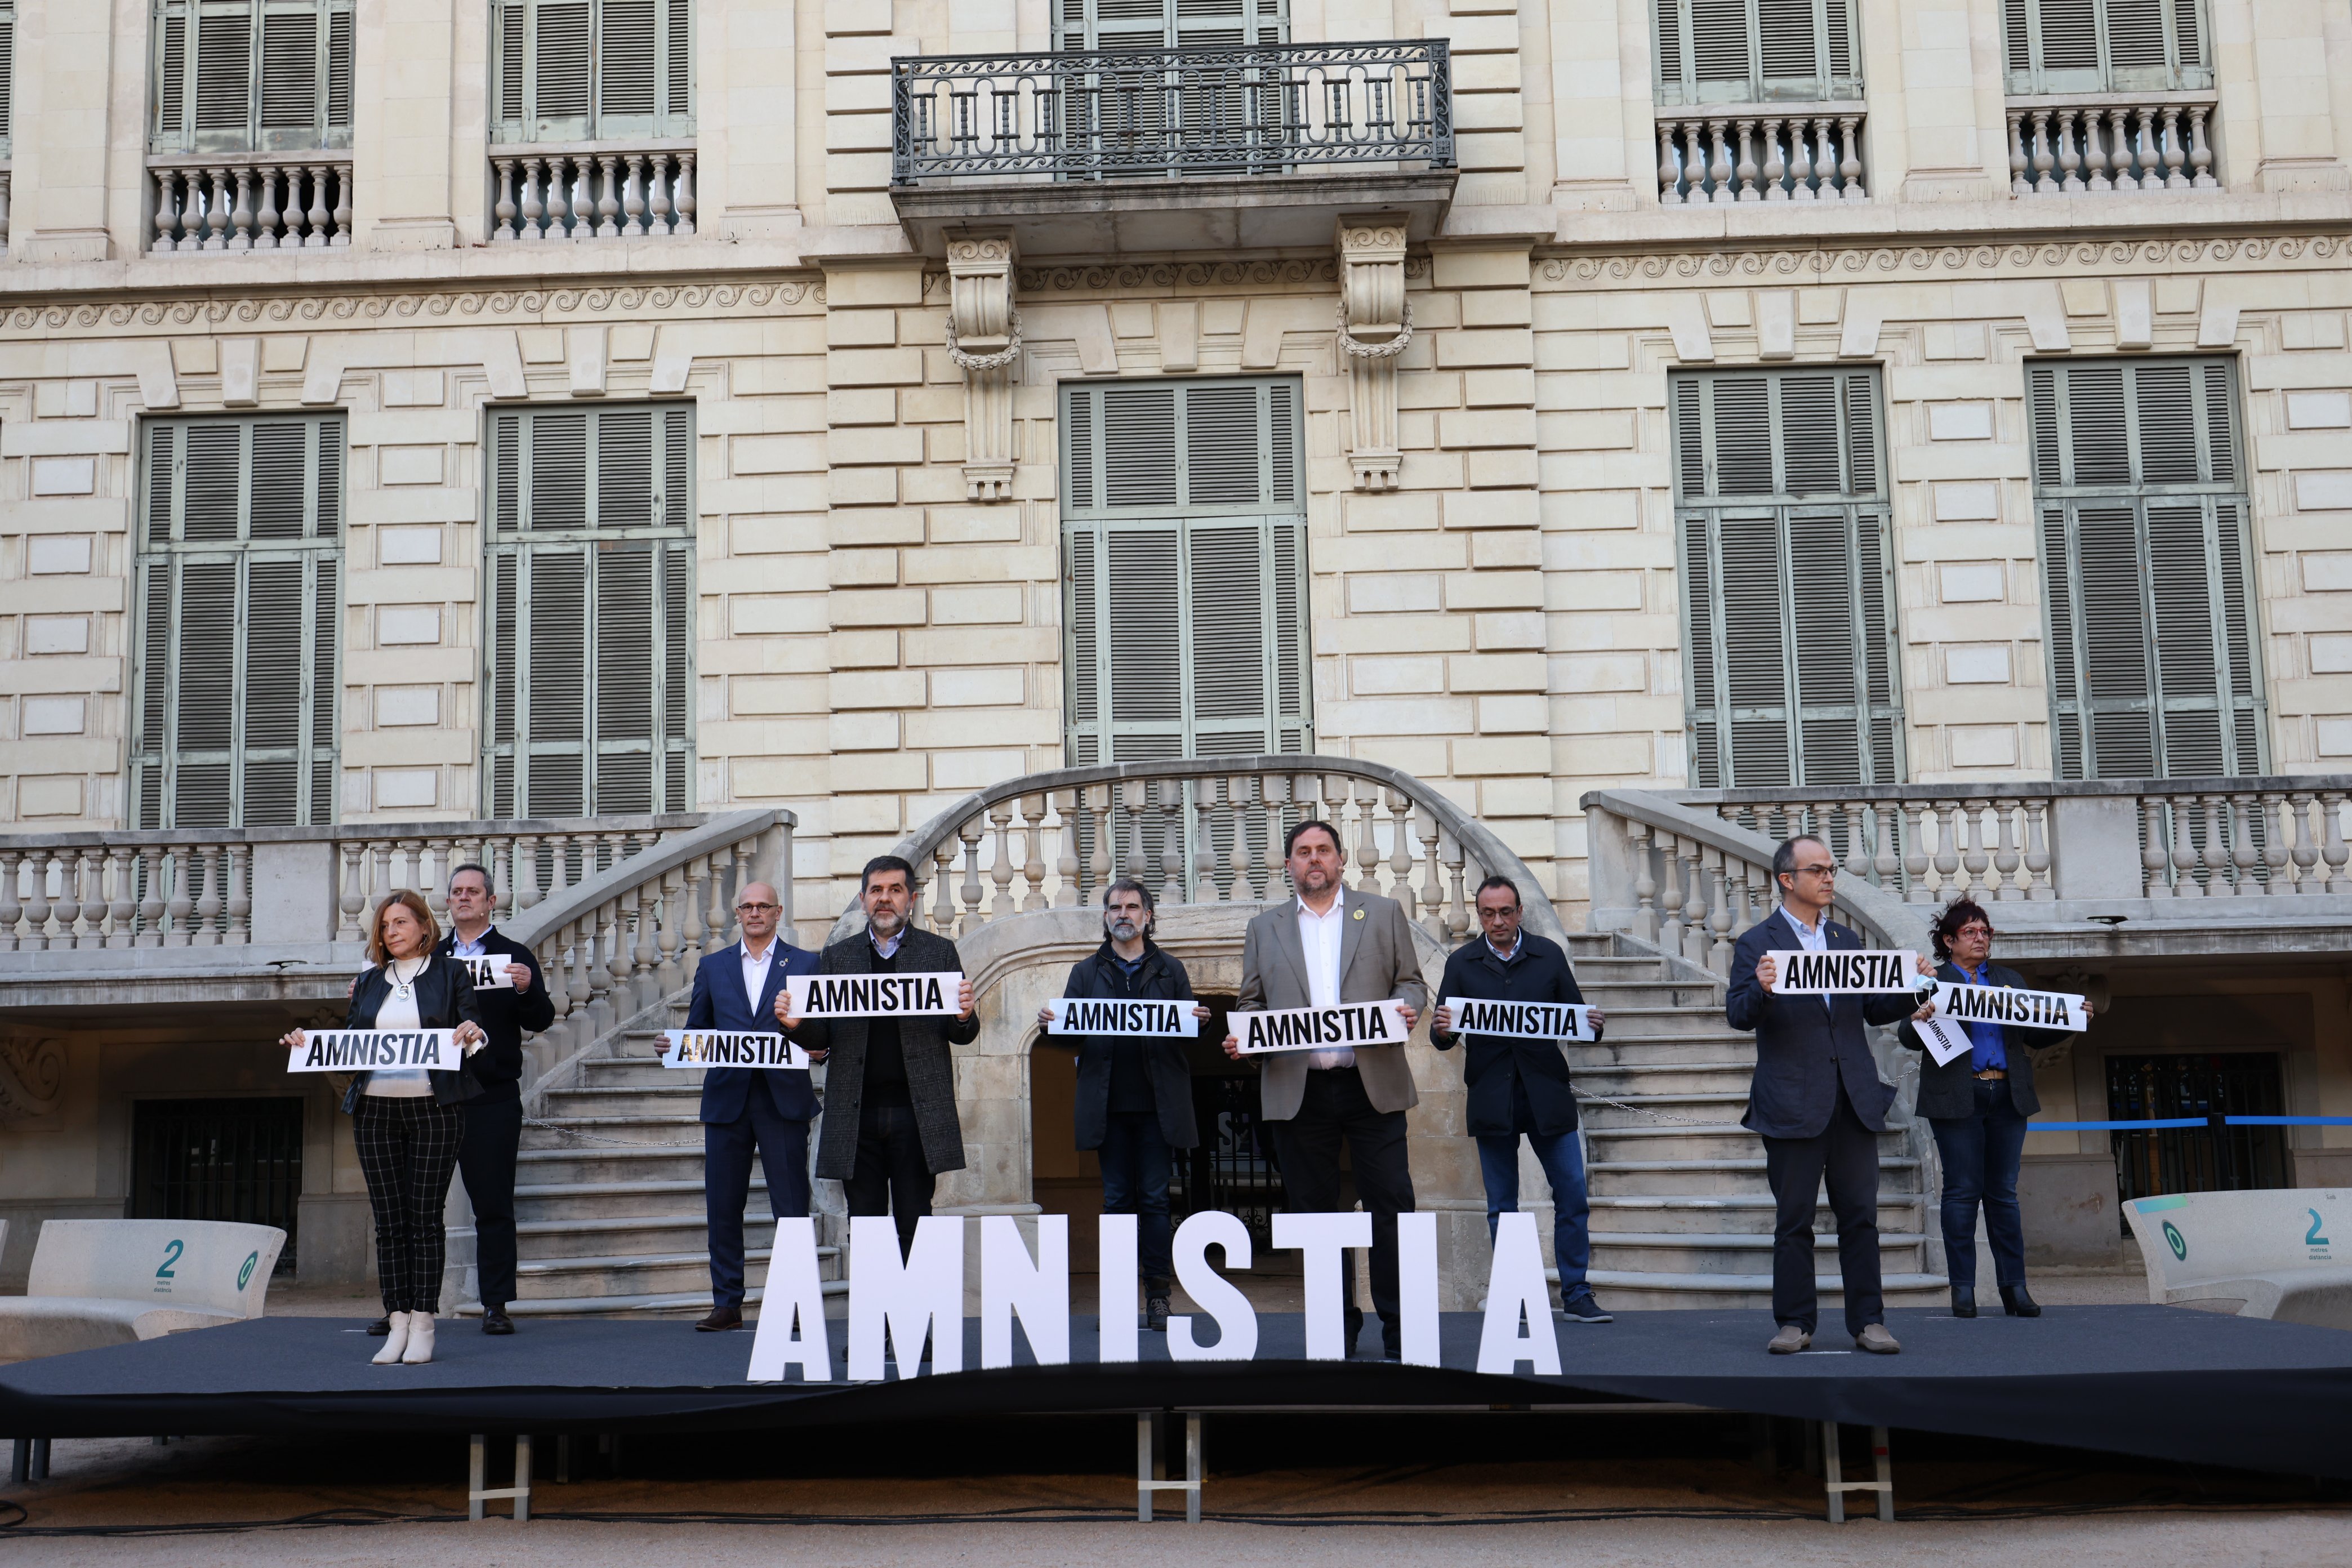 The nine Catalan political prisoners together, in a call for unity and an amnesty